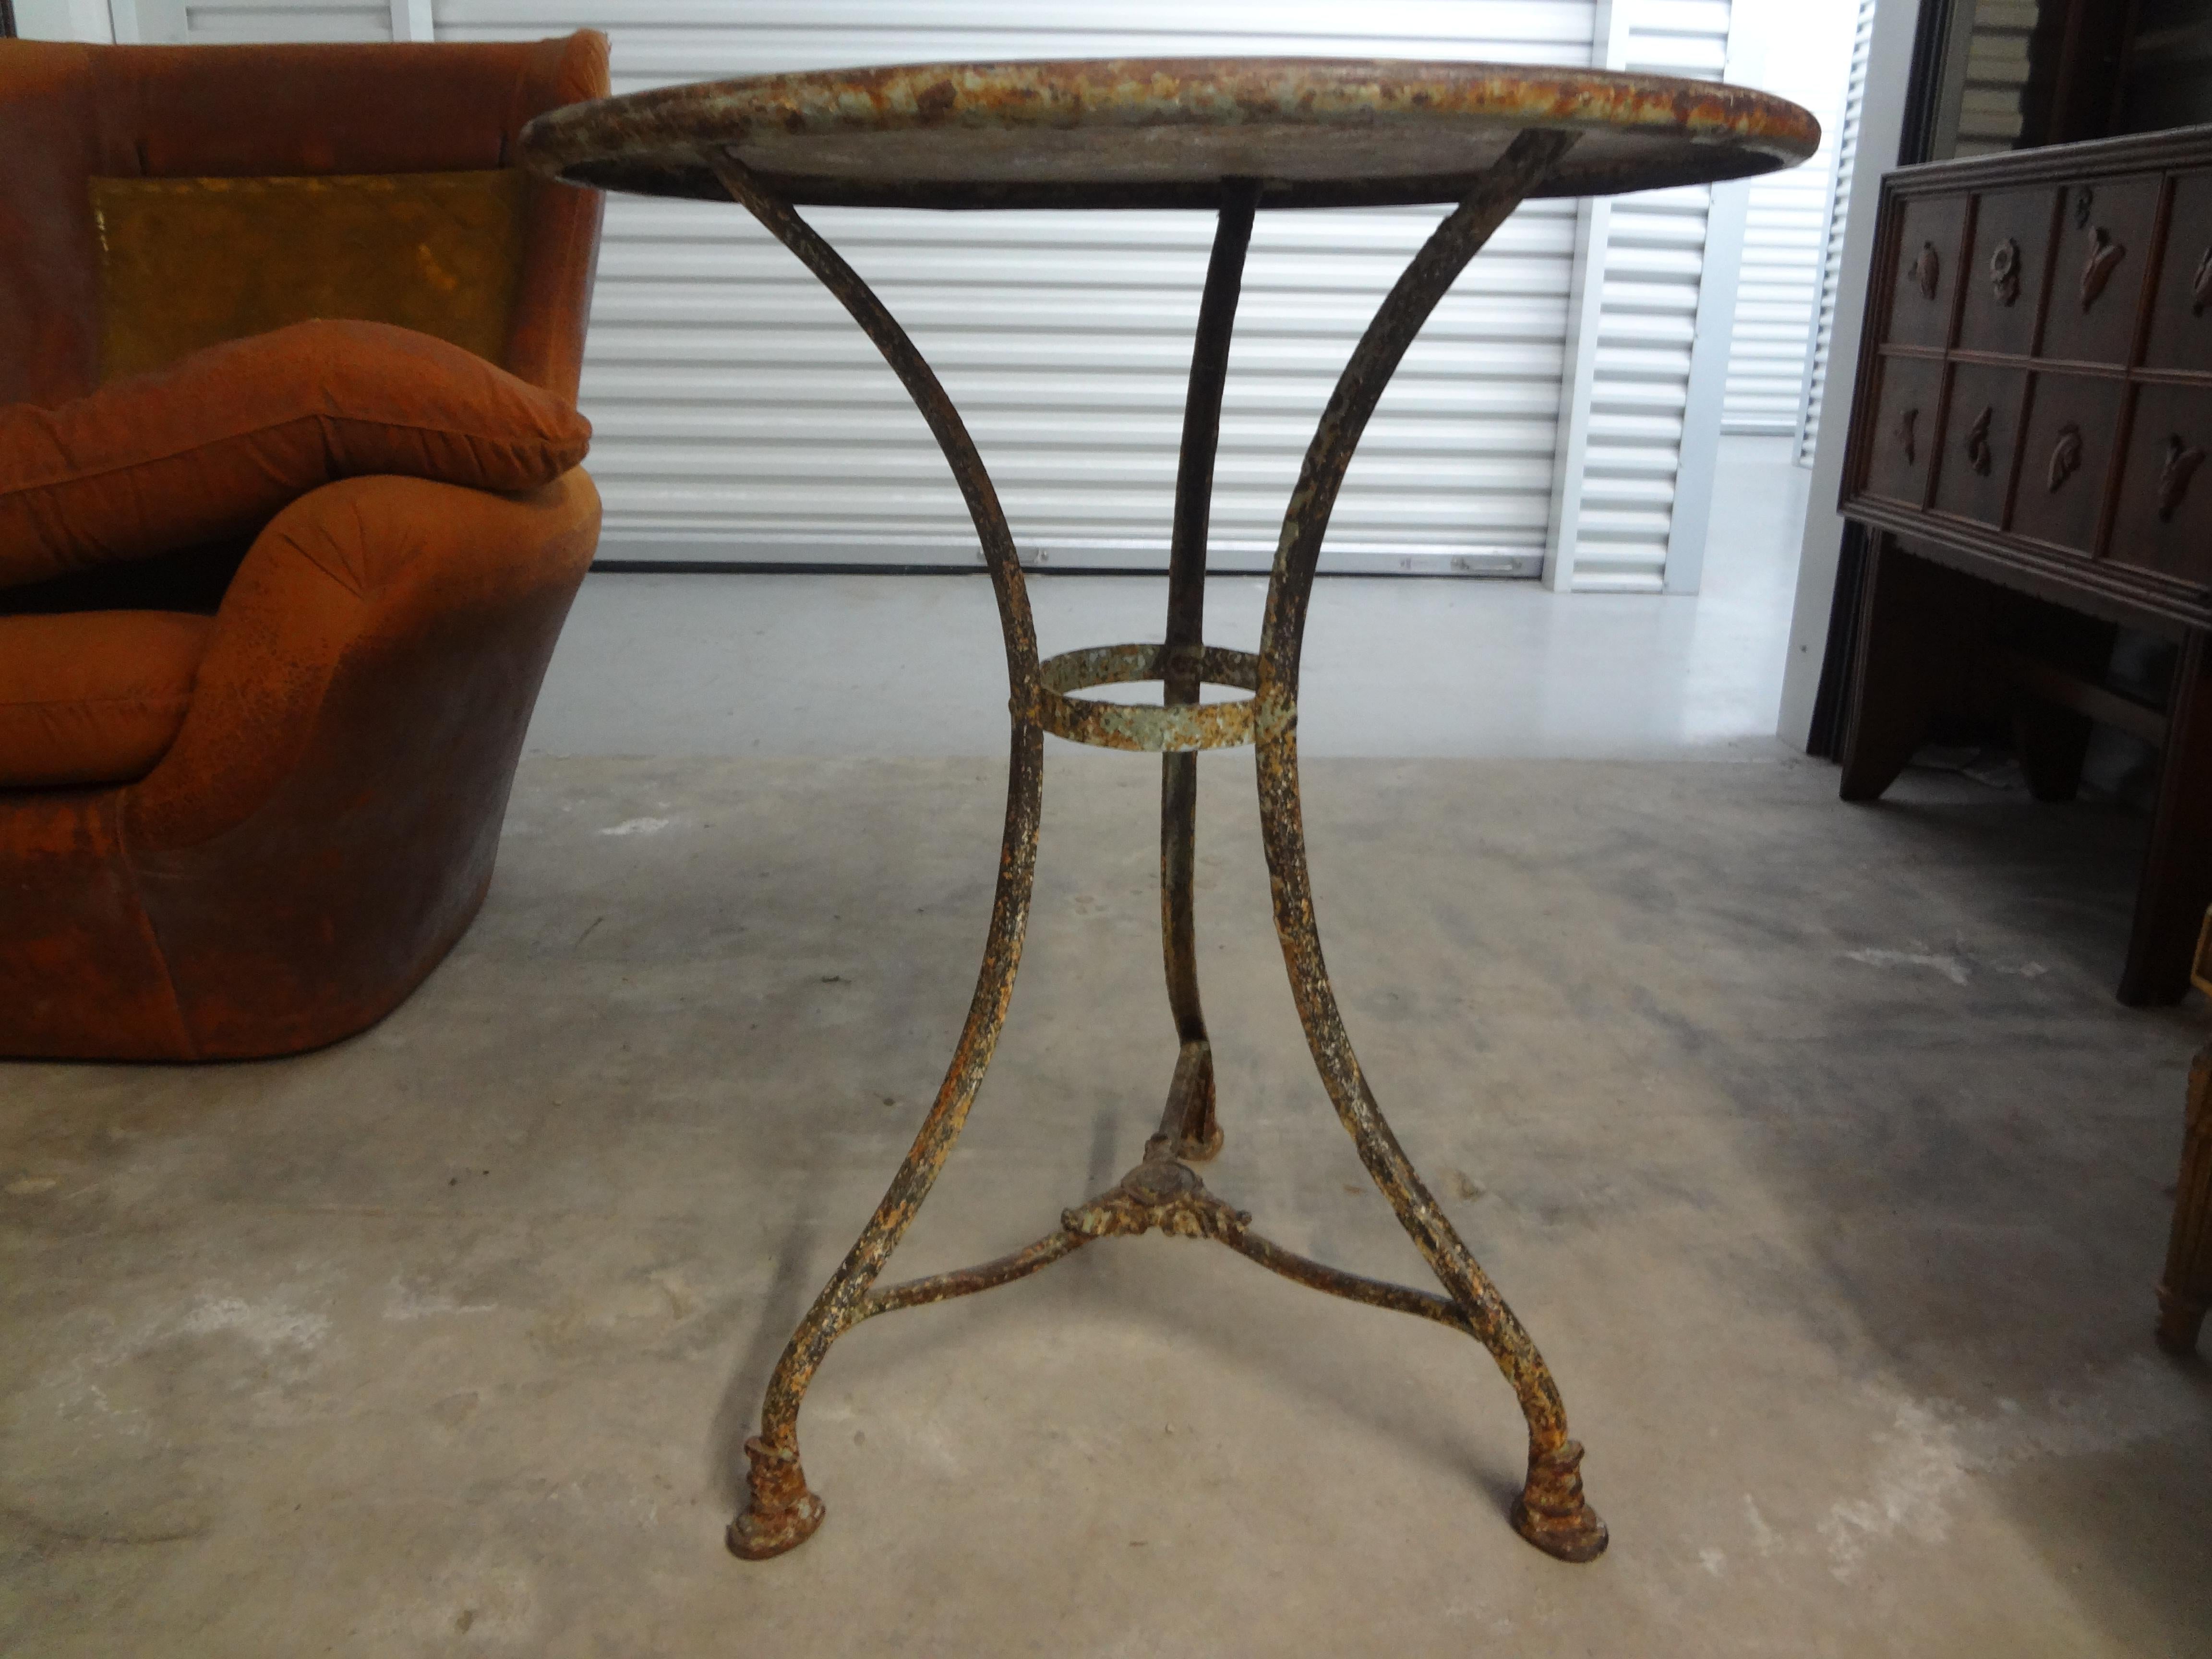 Belle Époque 19th Century French Garden Table By Arras Foundry